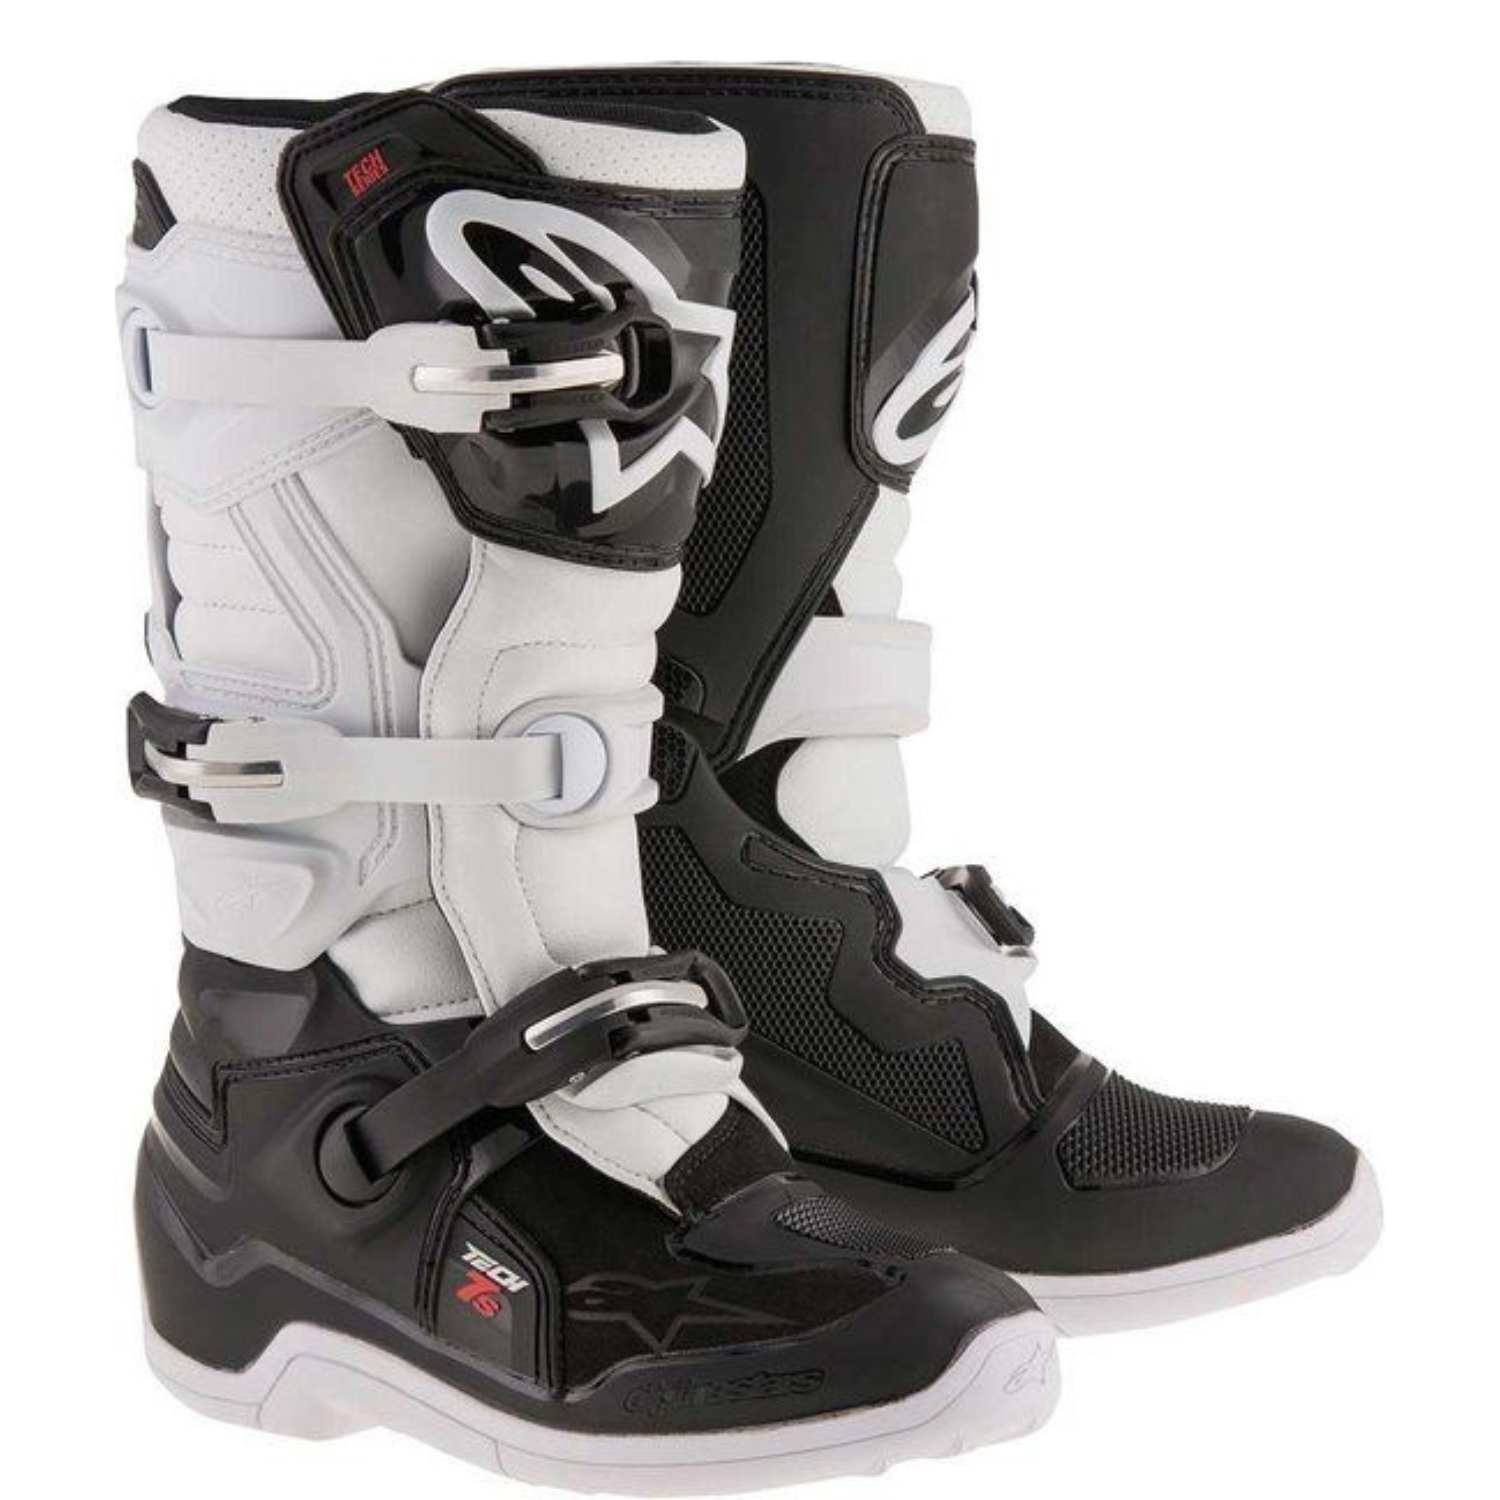 Image of Alpinestars Tech 7 S Black White Boots Taille US 8